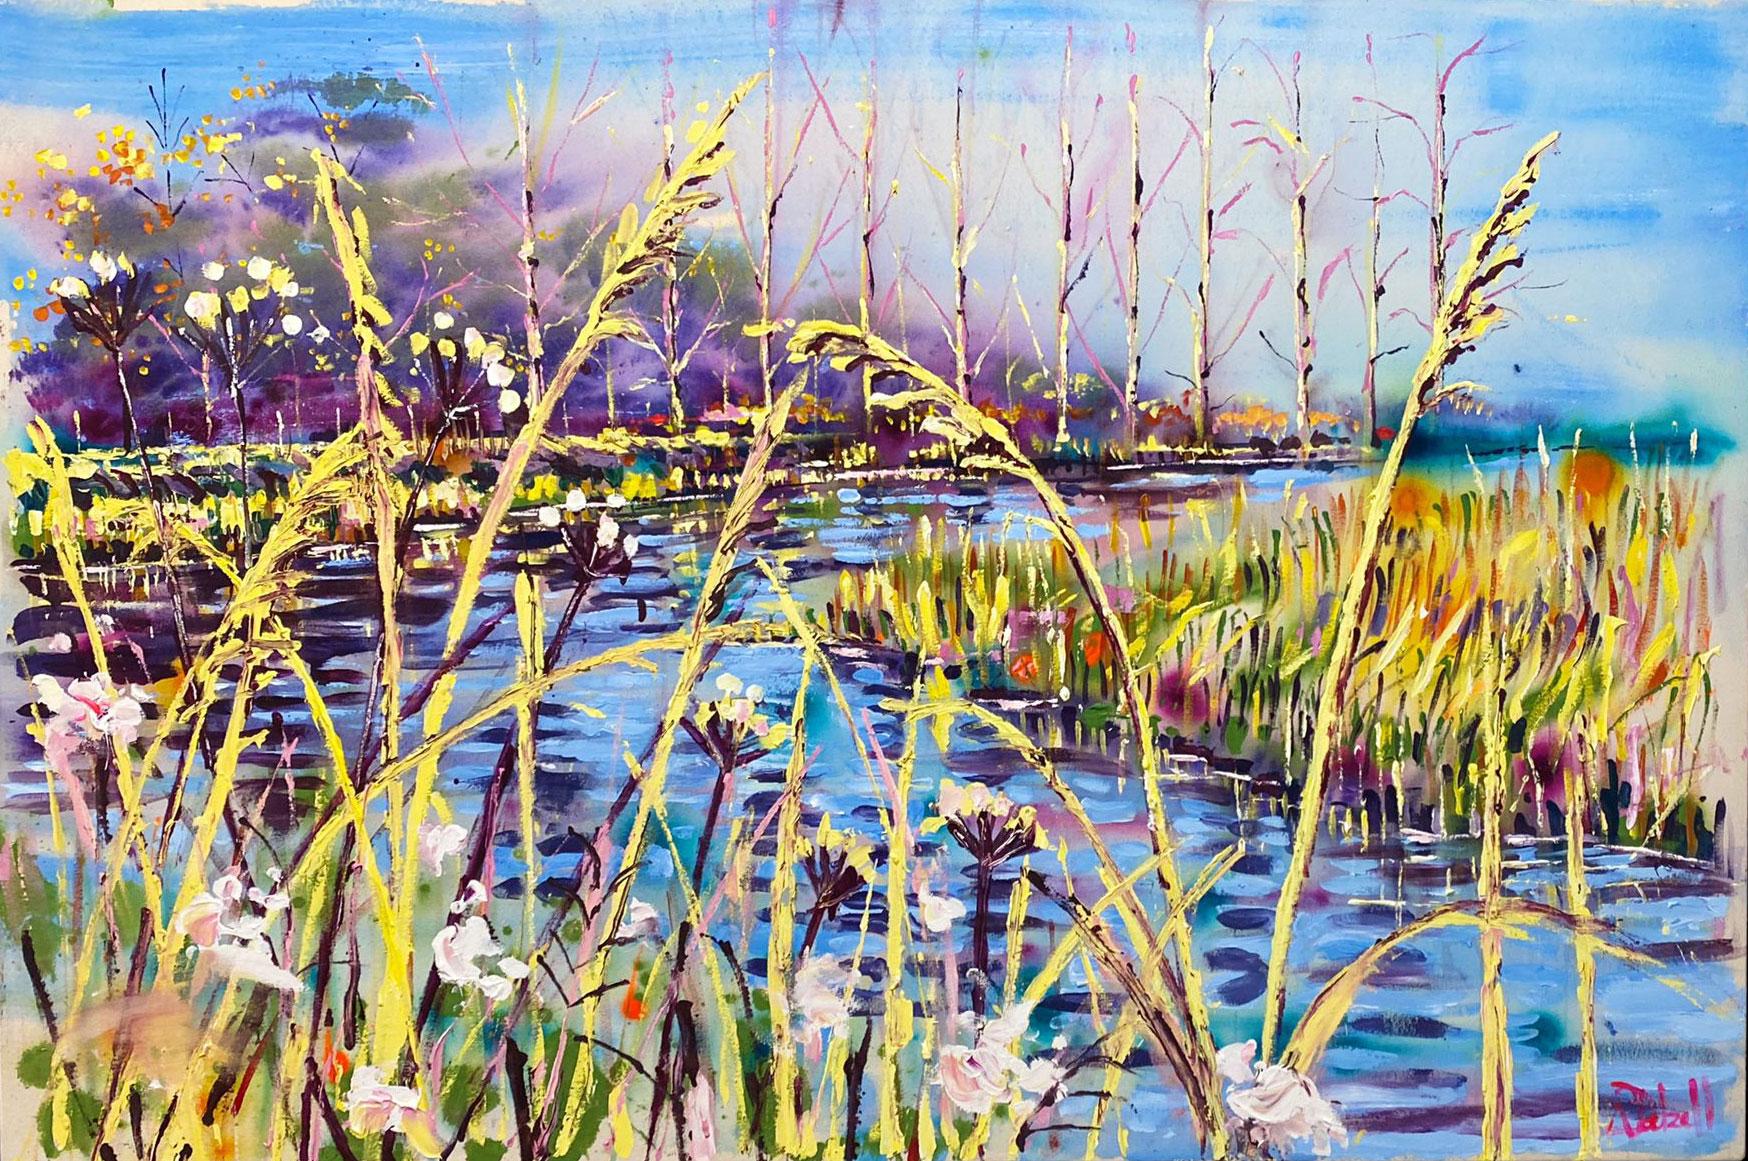 An artwork filled with vibrant colour and painted with a free and expressive use of acrylic paint on canvas.  ‘The air is chilled’ is very atmospheric and  has a wonderful depth.  It is based on the Bure river, Norfolk during the cold winter